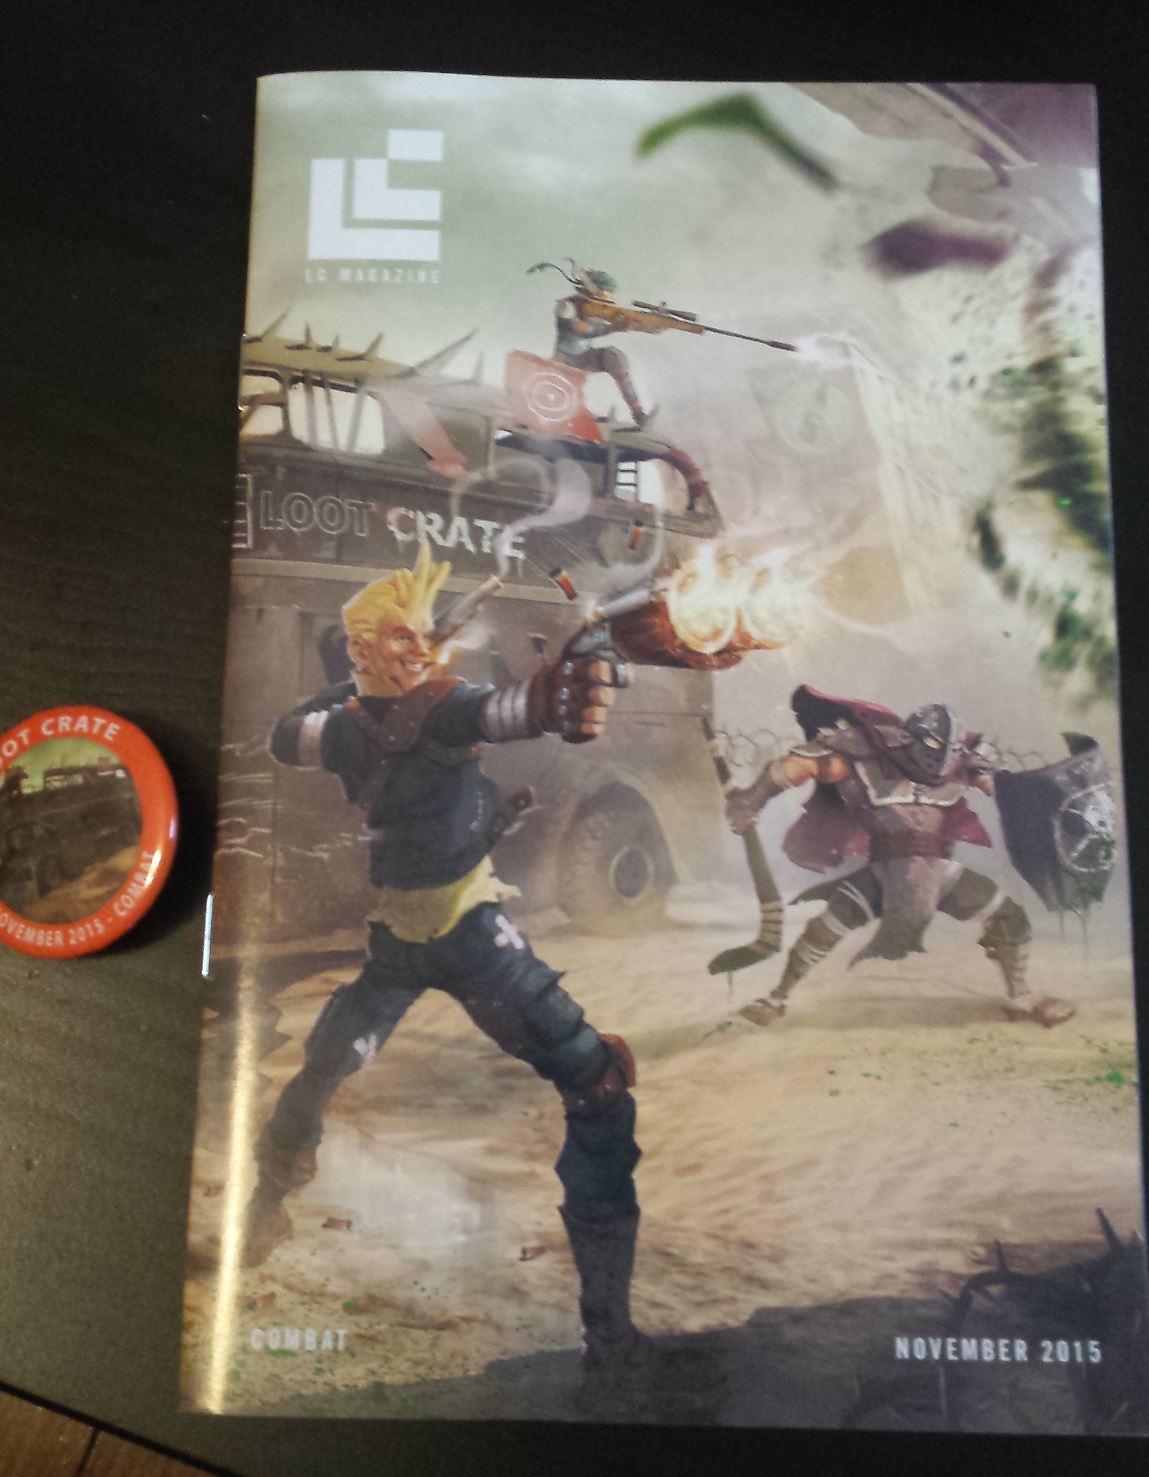 Magazine and pin, loot crate, loot crate review, november loot crate, unboxing